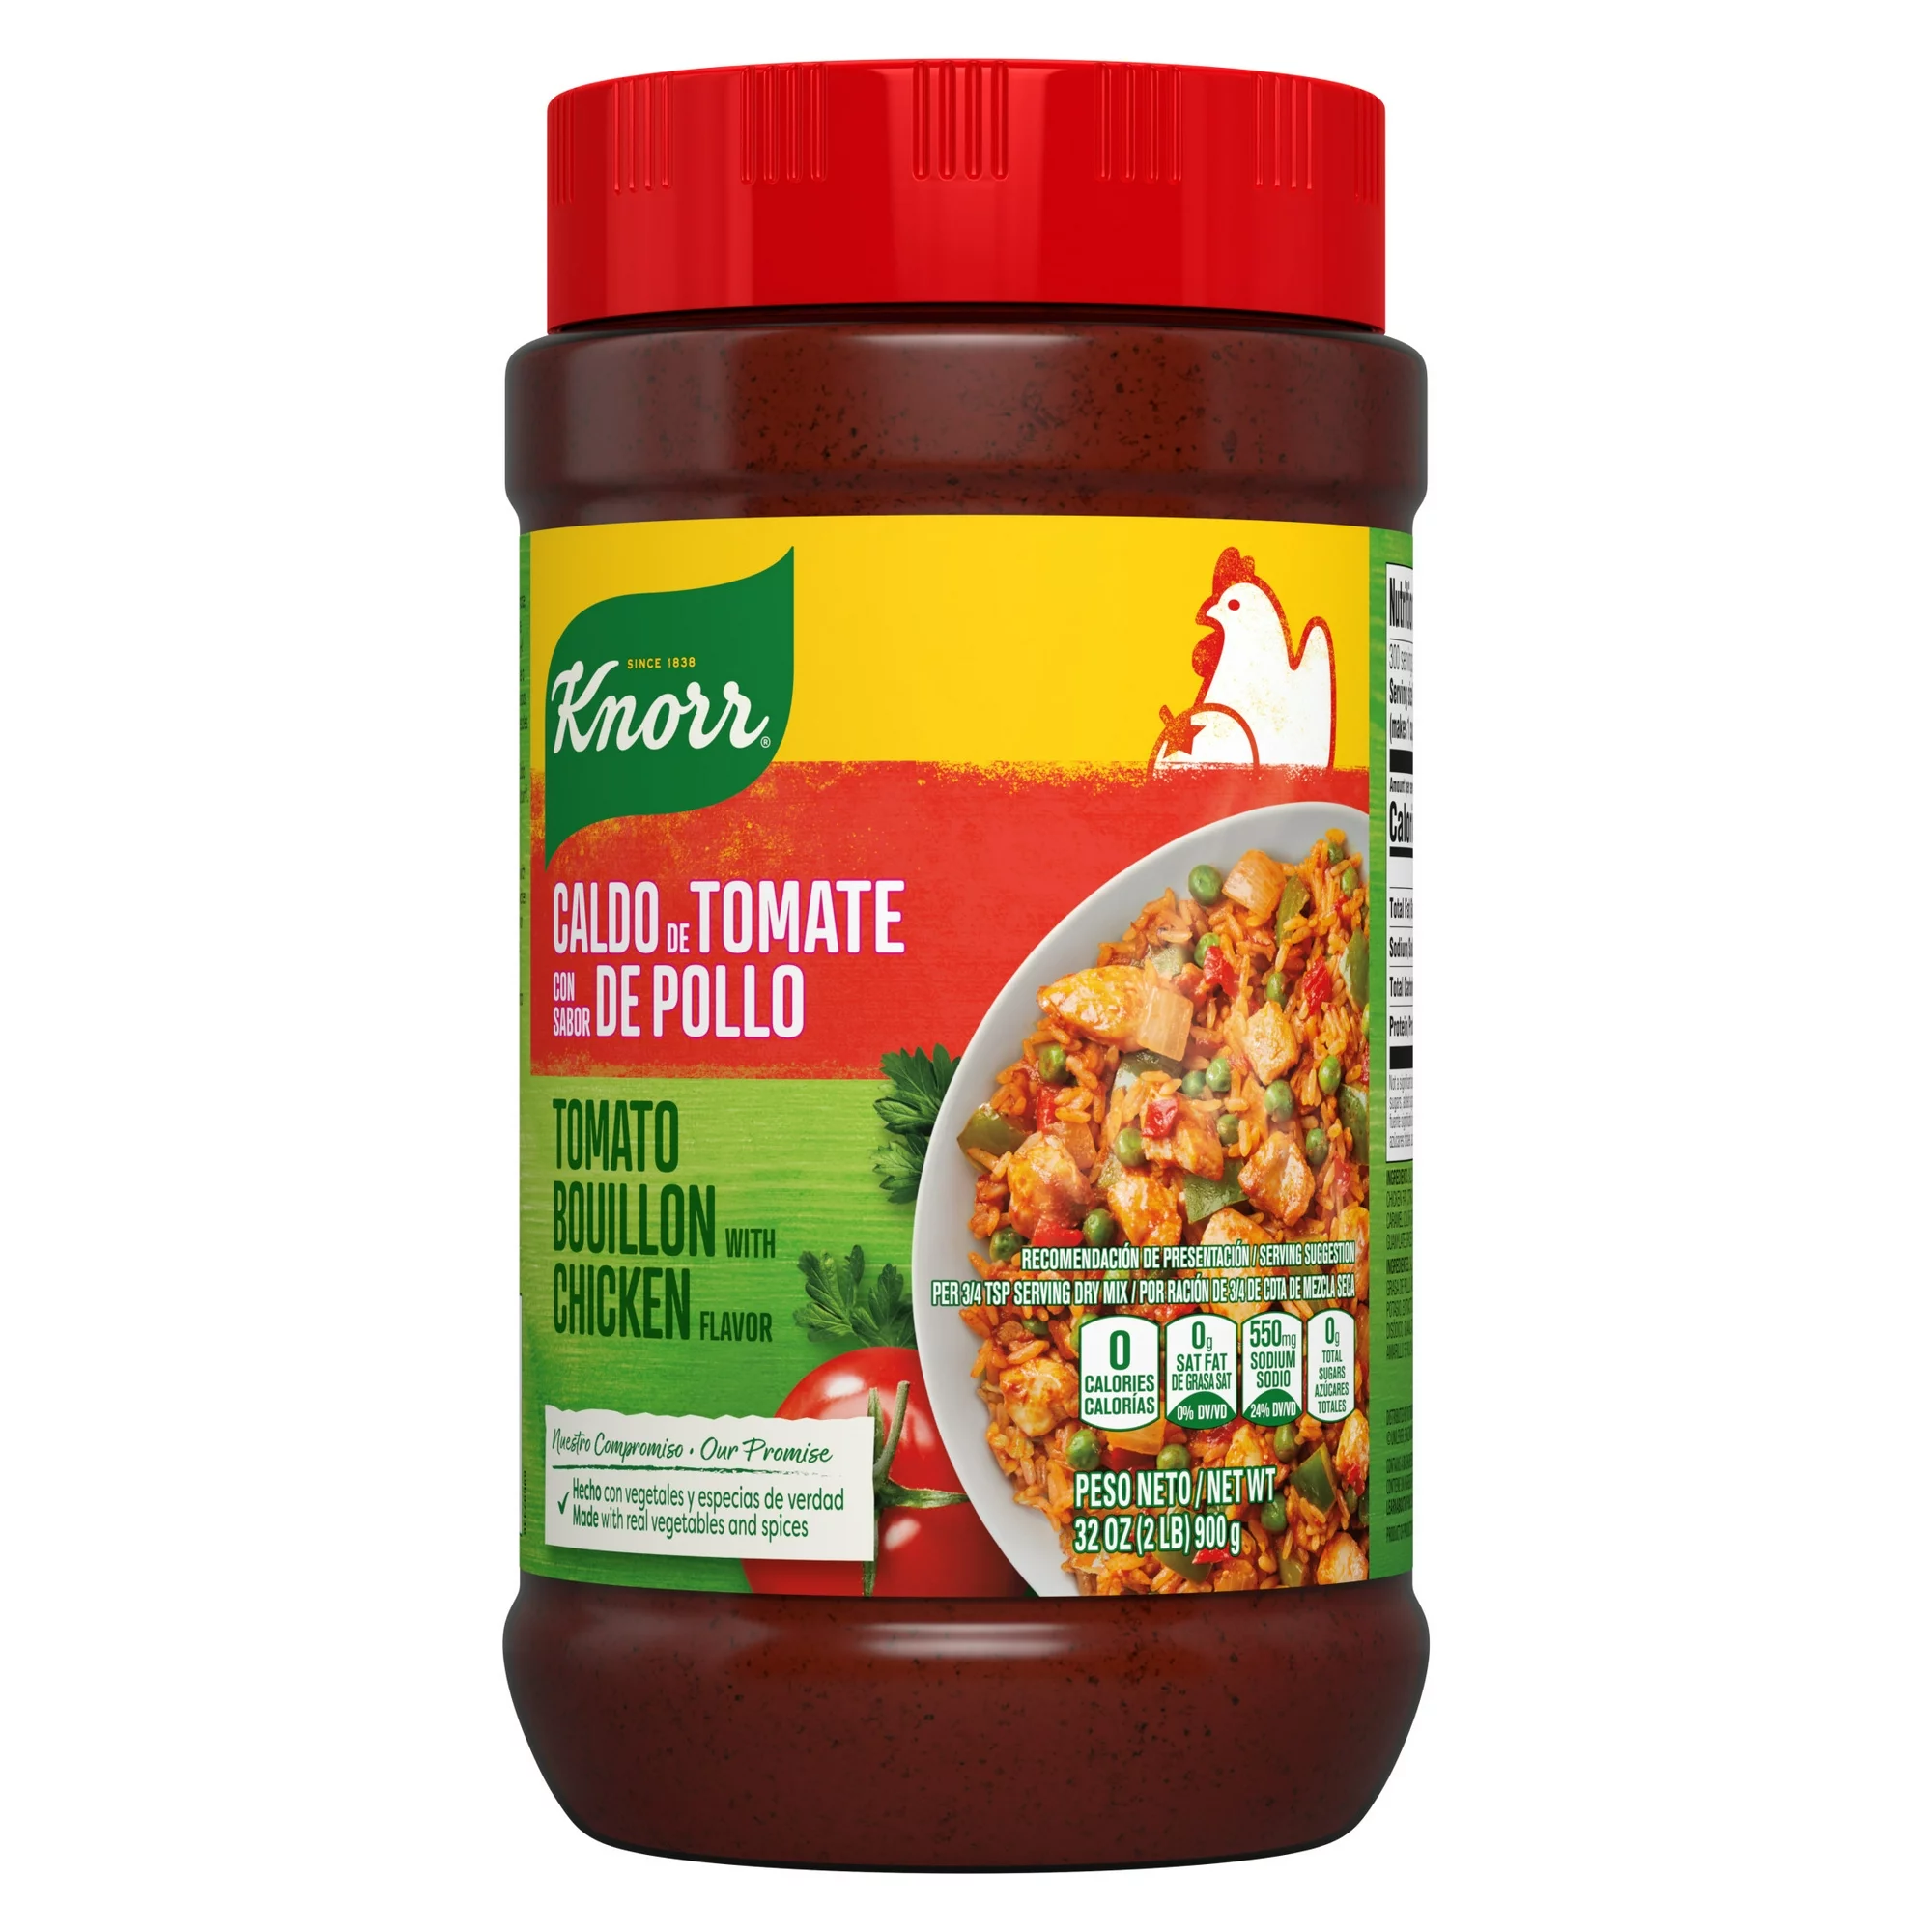 knorr - Tomato bouillon with Chicken Flavour